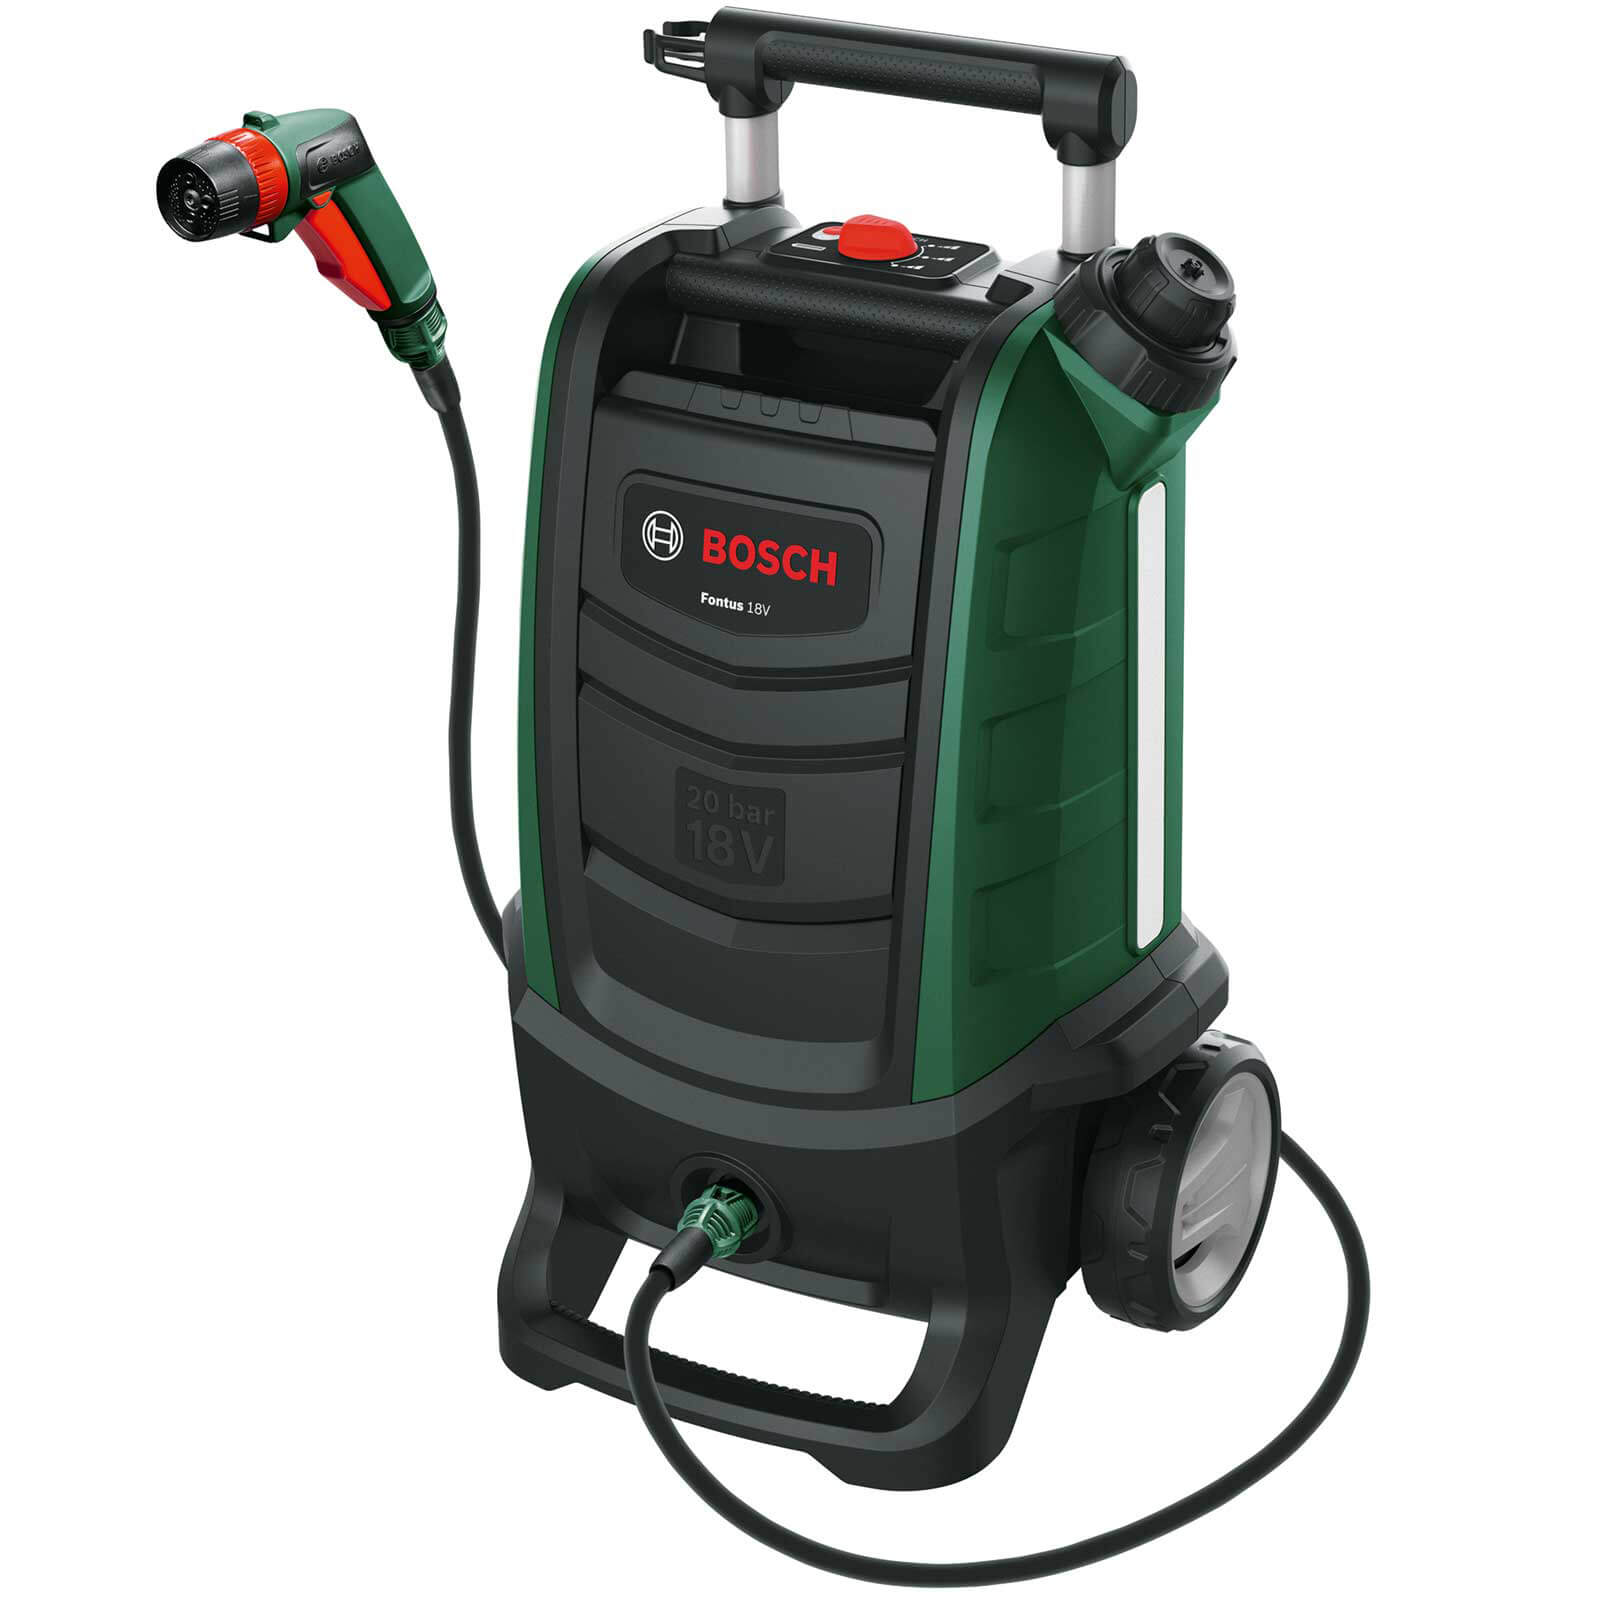 How to Pick the Best Pressure Washer for your Car, Home, and Garden